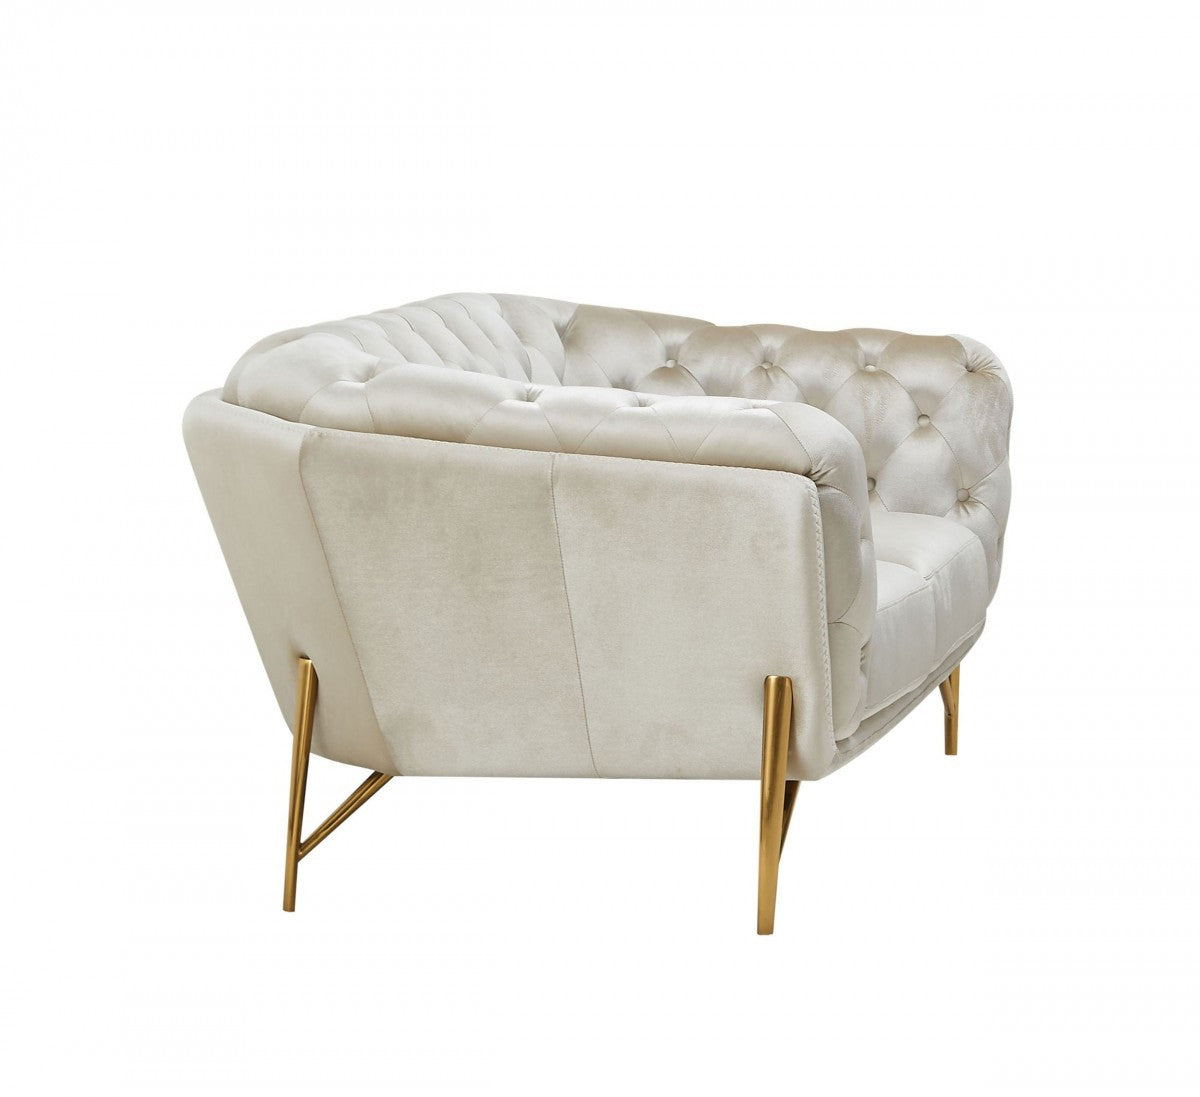 69" Pearl Tufted Velvet And Gold Chesterfield Love Seat